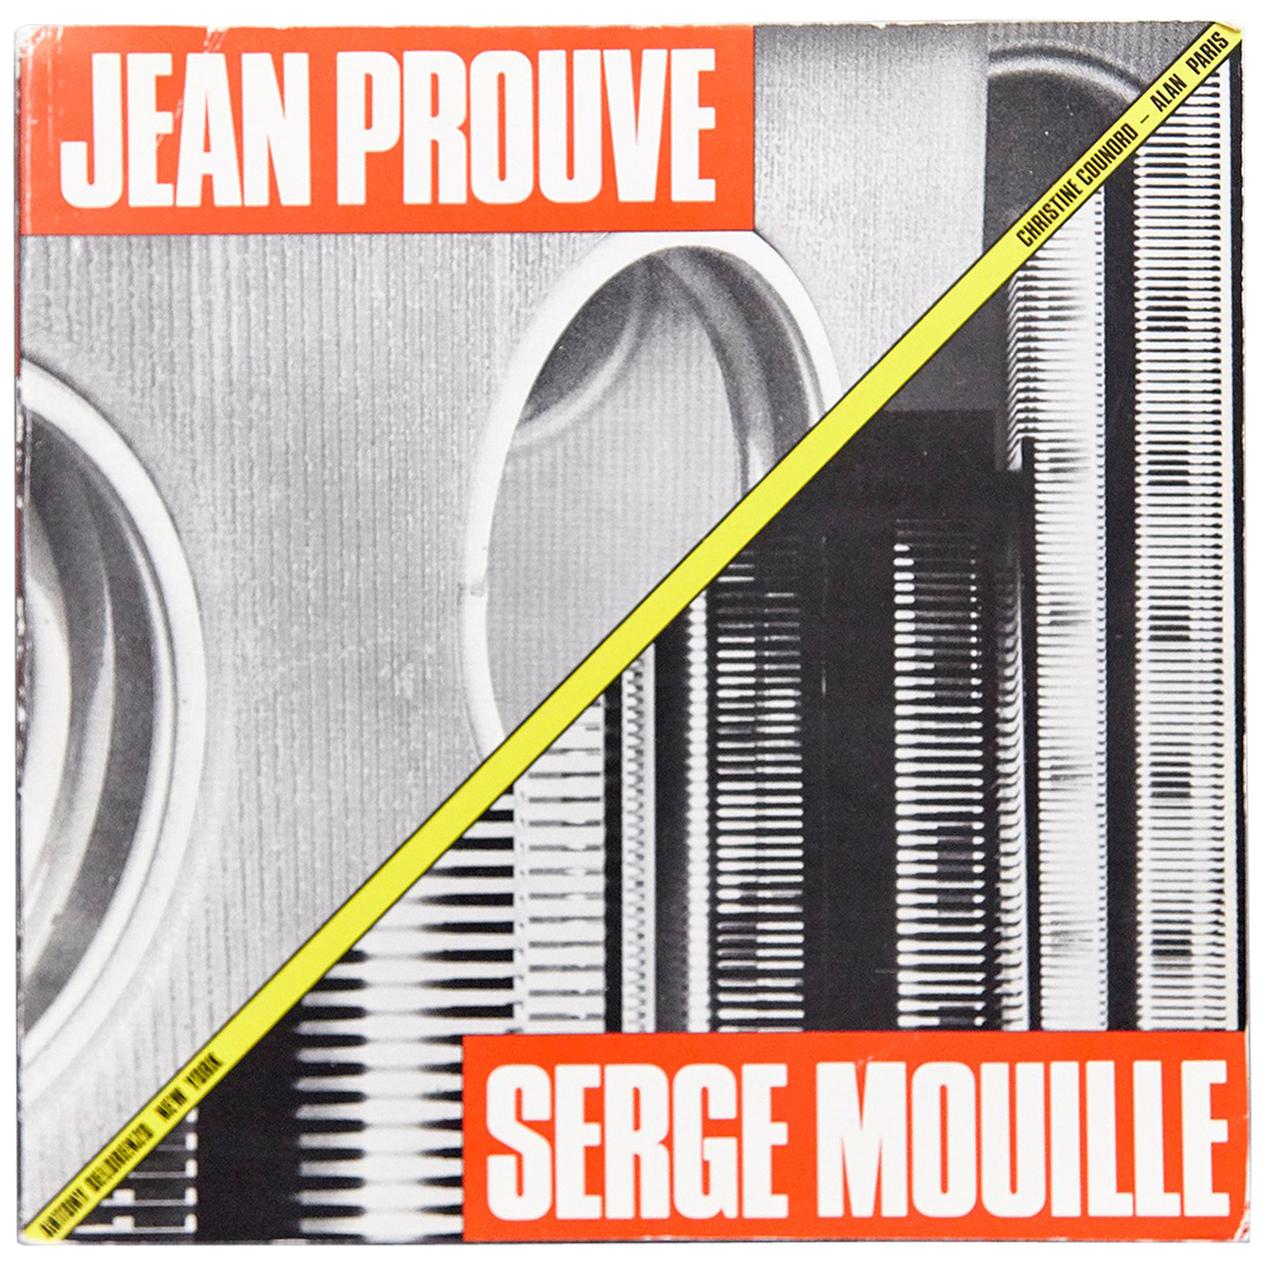 Jean Prouve Serge Mouille Mid Century Modern Two Master Metal Workers Book.